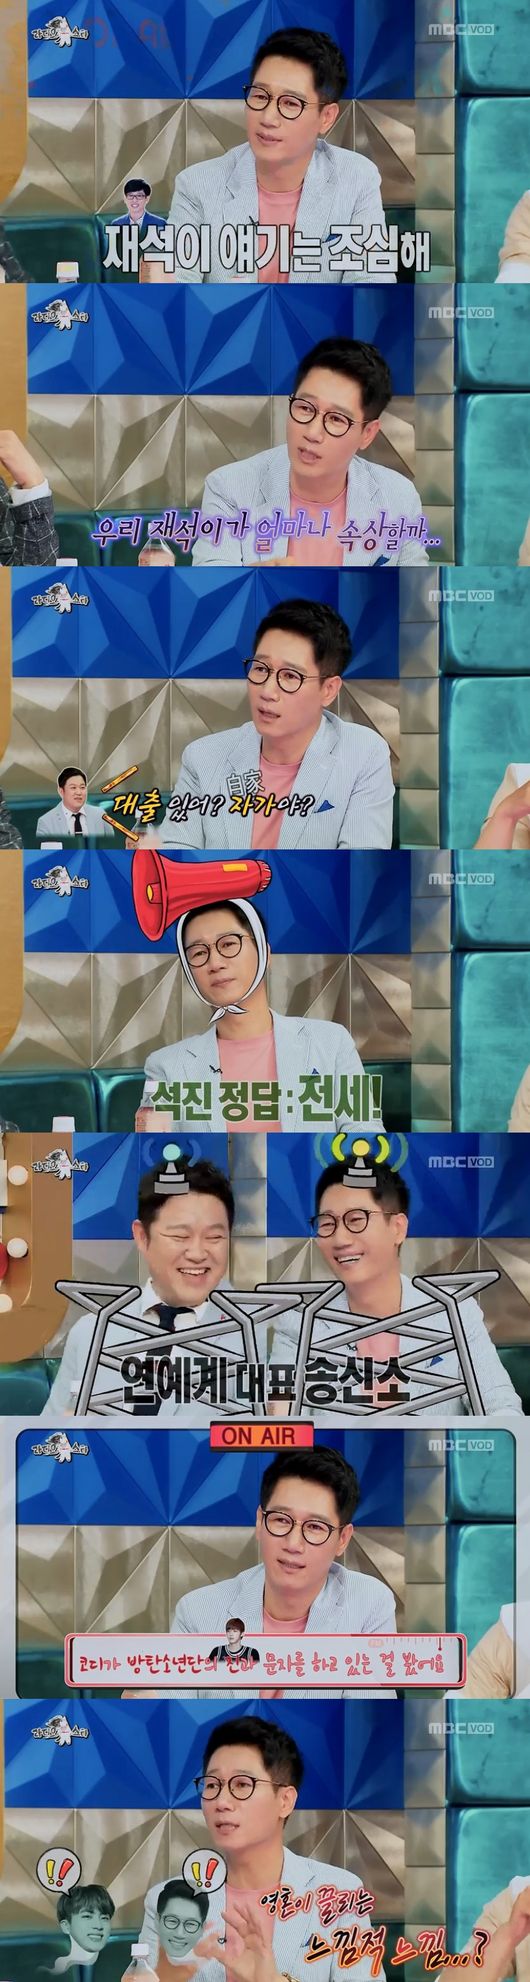 Disclosure is a great welcome, not because you distract and shave your opponent, but because you disclosure a warm and warm story.Ji Suk-jin, who appeared on Radio Star, received viewers navels with Disclosure, which is different in dimension.On MBC Radio Star broadcast on the 20th, Ji Suk-jin was called as an entertainment transmission station with Gim Gu-ra.It is a lot of words, so we talk to each other frequently and share the current status of the entertainment industry.However, Gim Gu-ra said, Ji Suk-jin is cautious when only Yoo Jae-Suk talk comes out.At this, Ji Suk-jin said, I am confident that I know more about Yoo Jae-Suk than anyone else, but when it is delivered to Gim Gu-ra, it is erroneous.I think that the beginning of the misinformation is me, so I want to see how upset Yoo Jae-Suk will be. At this time, Cha Tae-hyun asked, Yoo Jae-suk is a chartered person.Unlike Gim Gu-ra, who does not know, Ji Suk-jin replied, Yoo Jae-Suk is a person.For the first time on the air, Yoo Jae-Suk was told that it was not a self but a charter, and MCs shouted out.Ji Seok-ji also revealed a text from BTS Jin. Jin came out to Running Man for a while and played games.I saw the eyes that I wanted to get close. When BTS was number one on the Billboard, I texted him, even playing the entire song from Date of the City to BTS-free bulletproof special. Jin also texted him on the show.She and I are brothers. I am texting you without warning. I send you a picture of LA. MCs suspected a friendship between Jean and Ji Suk-jin; eventually, Ji Suk-jin released a message from Jean, saying, Ill show you.MCs cut down Ji Suk-jin is squeaky, but Ji Suk-jin made the fans of Ami by revealing a personal friendship anecdote with Jean to the end.The Disclosure and BTS effects of Ji Suk-jin were synergistic.The moment Ji Suk-jin revealed the letter of gin, the ratings were 8.3% (Nilson metropolitan area), taking the best minute; thanks to the seductive and desirable episode Disclosure.Radio Star is the main point of the Disclosure game, which is a survival of guests to survive among bite MCs.Each person who appears has a lot of fun and fun with Disclosure for their surrounding entertainers or MCs.Sometimes excessive disclosure touched viewers, but this Ji Suk-jins Disclosure was warm and pleasant.The audience smiled comfortably.Radio Star